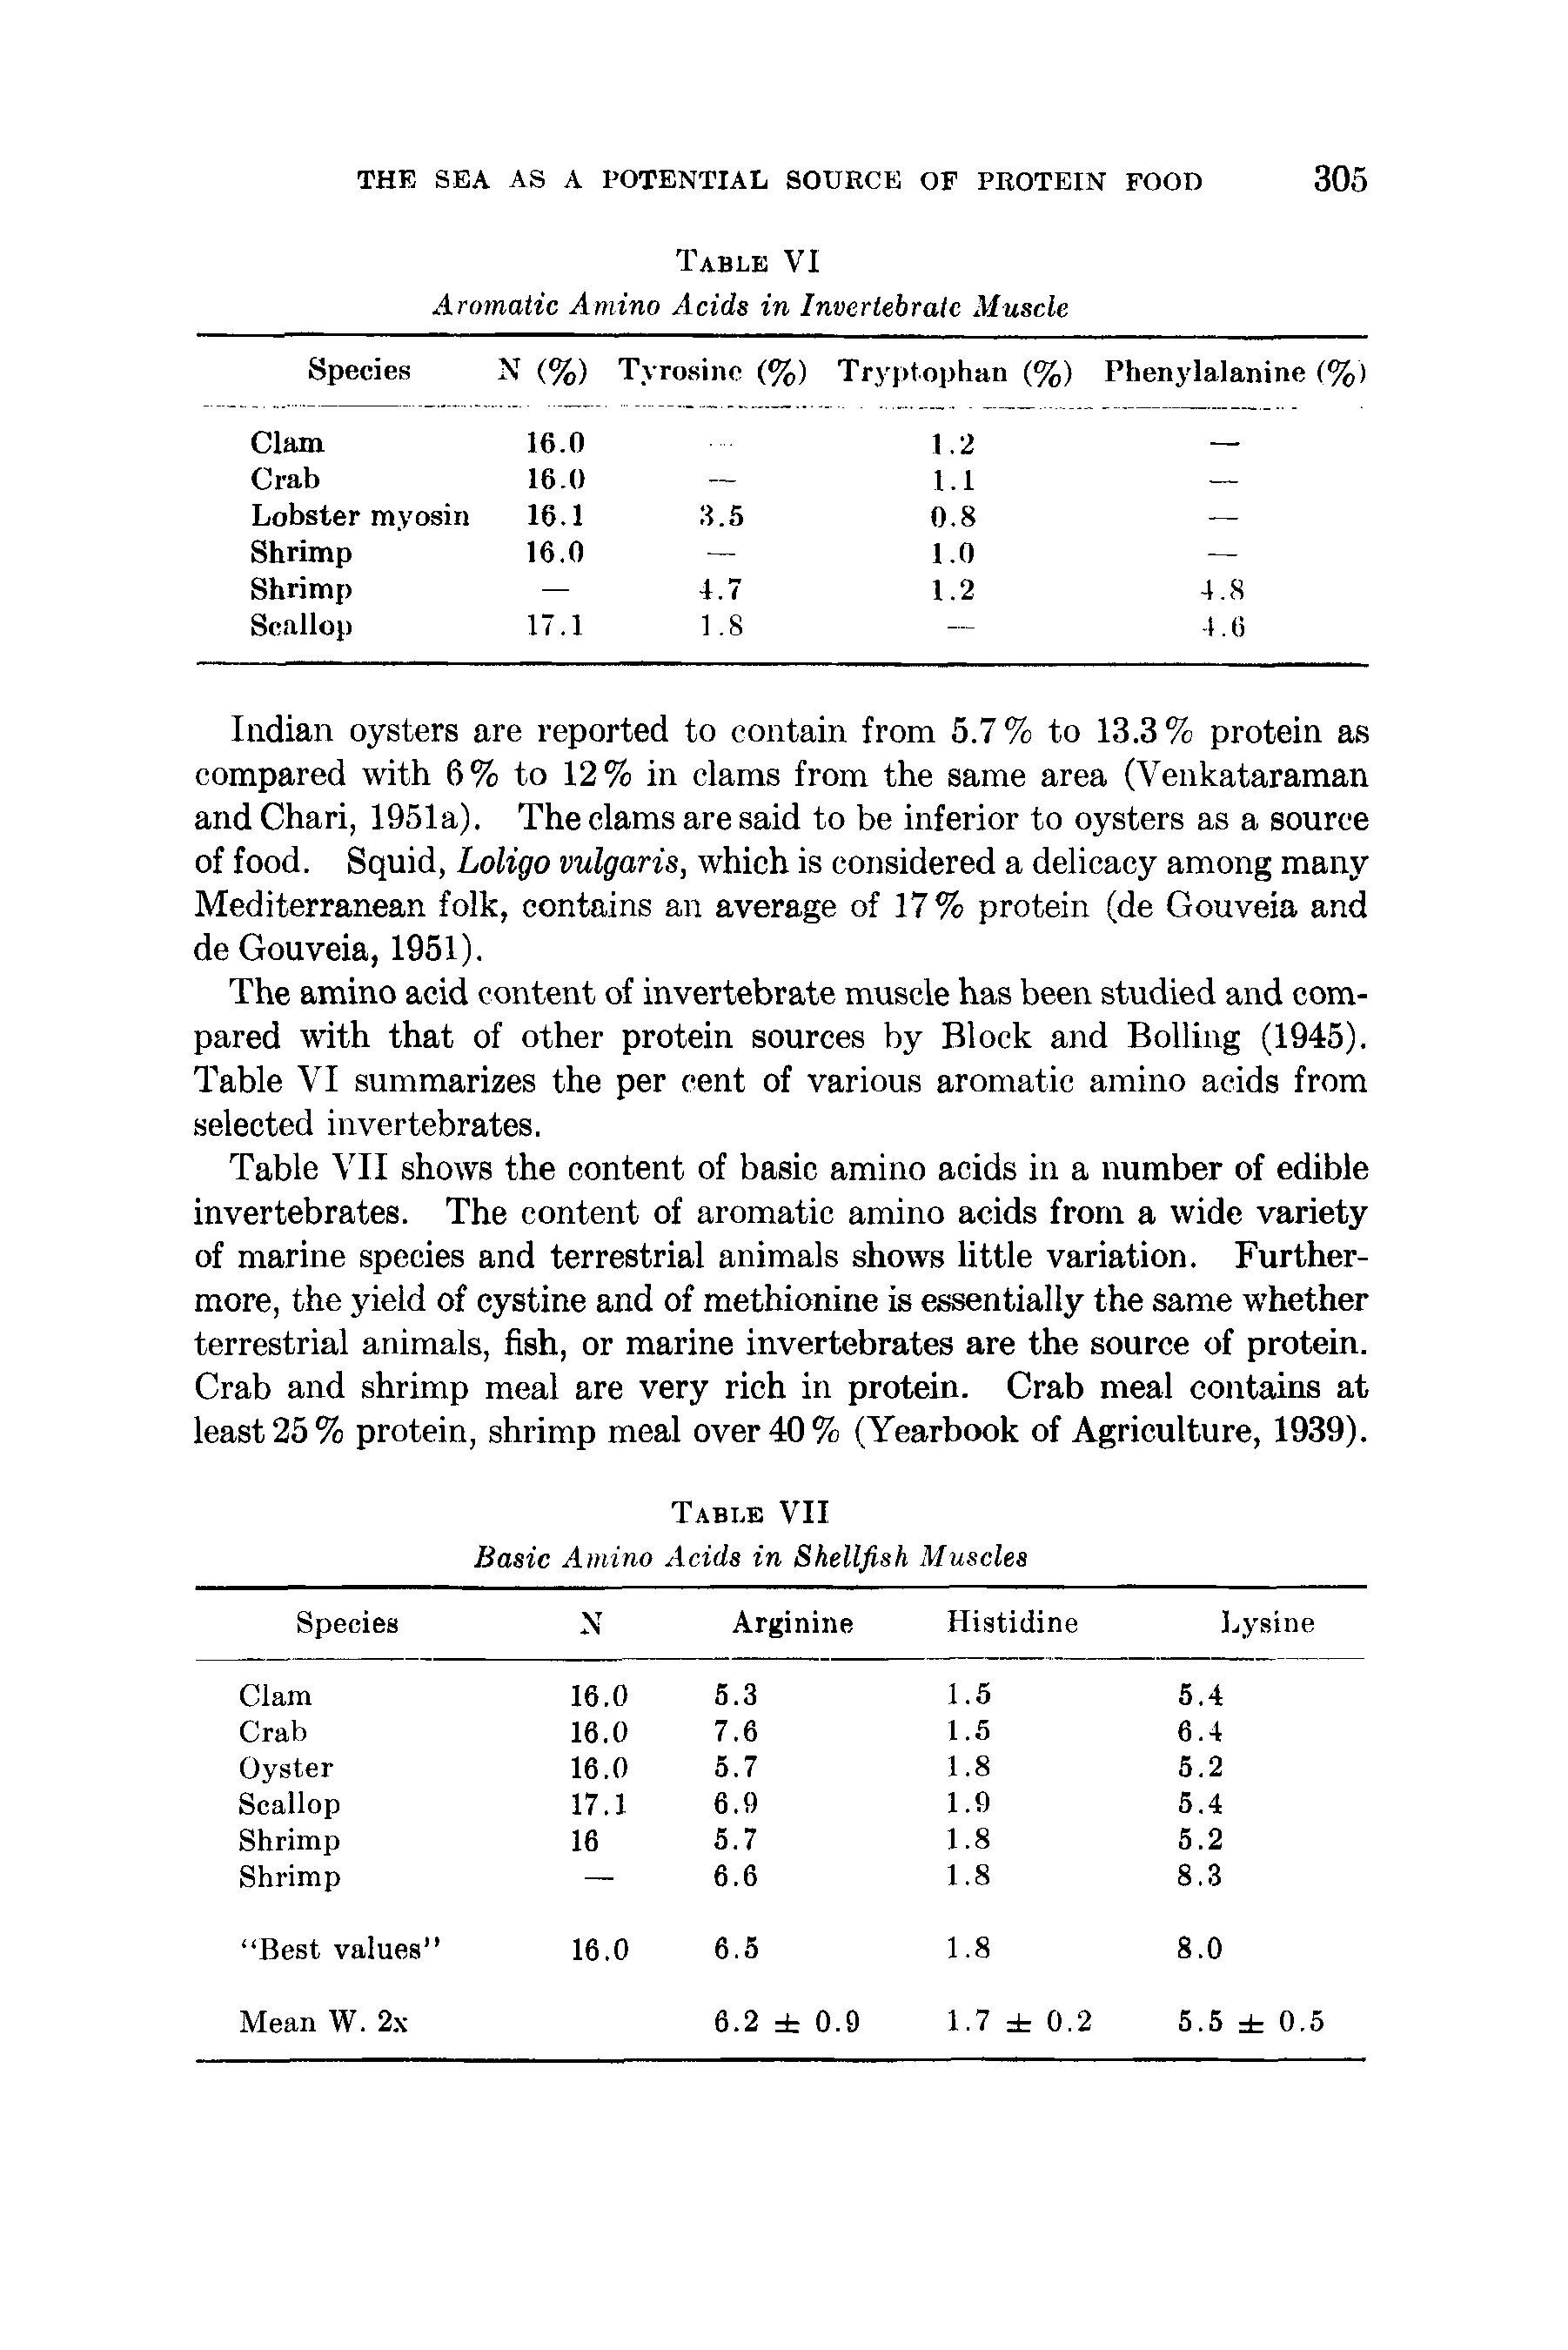 Table VII shows the content of basic amino acids in a number of edible invertebrates. The content of aromatic amino acids from a wide variety of marine species and terrestrial animals shows little variation. Furthermore, the yield of cystine and of methionine is essentially the same whether terrestrial animals, fish, or marine invertebrates are the source of protein. Crab and shrimp meal are very rich in protein. Crab meal contains at least 25% protein, shrimp meal over 40% (Yearbook of Agriculture, 1939).